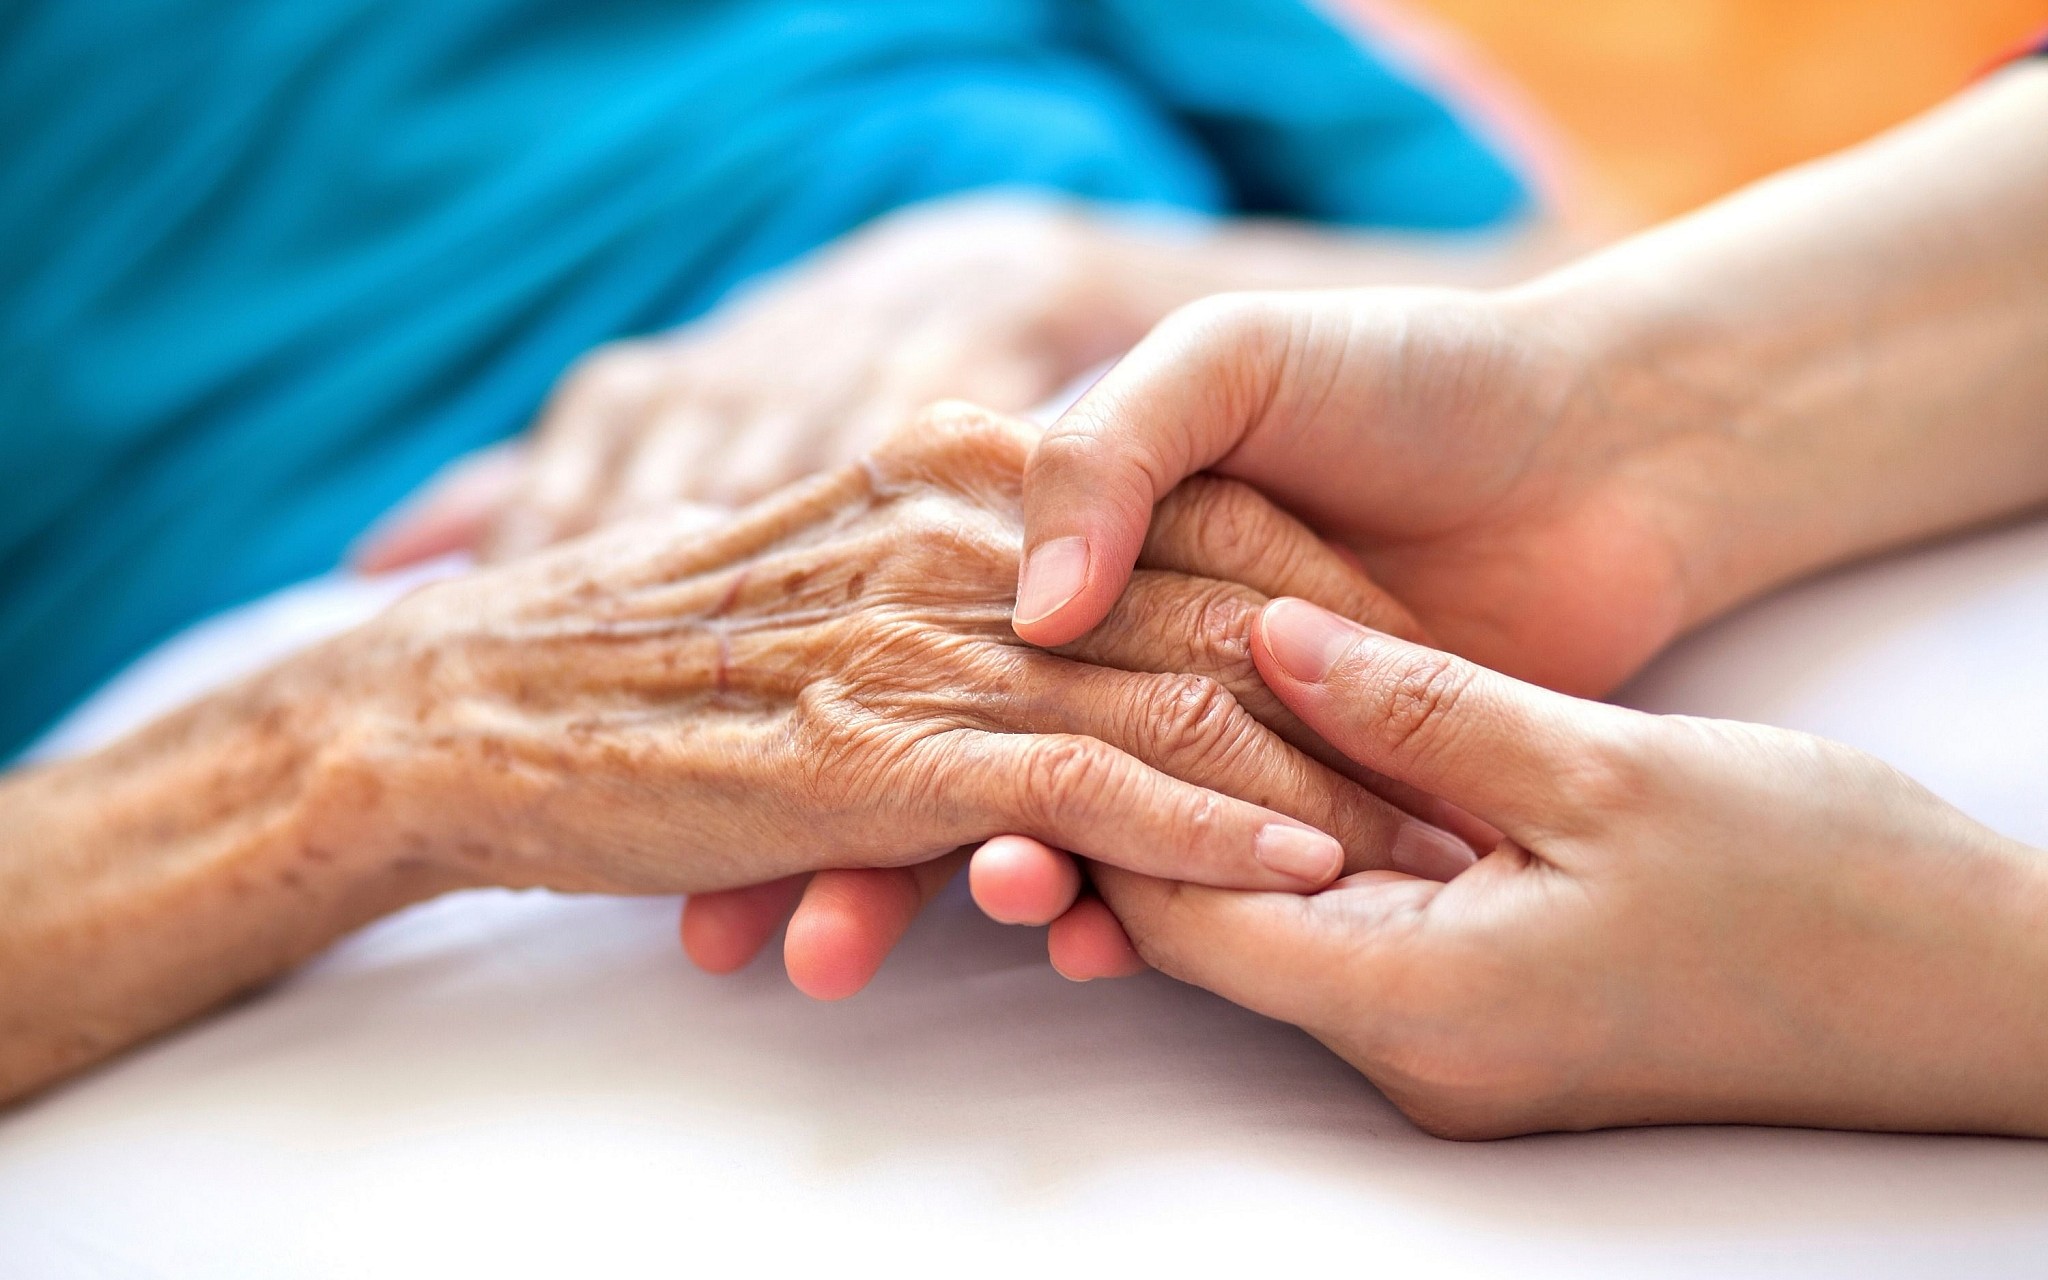 Aged Care Association welcomes National’s health workforce policy